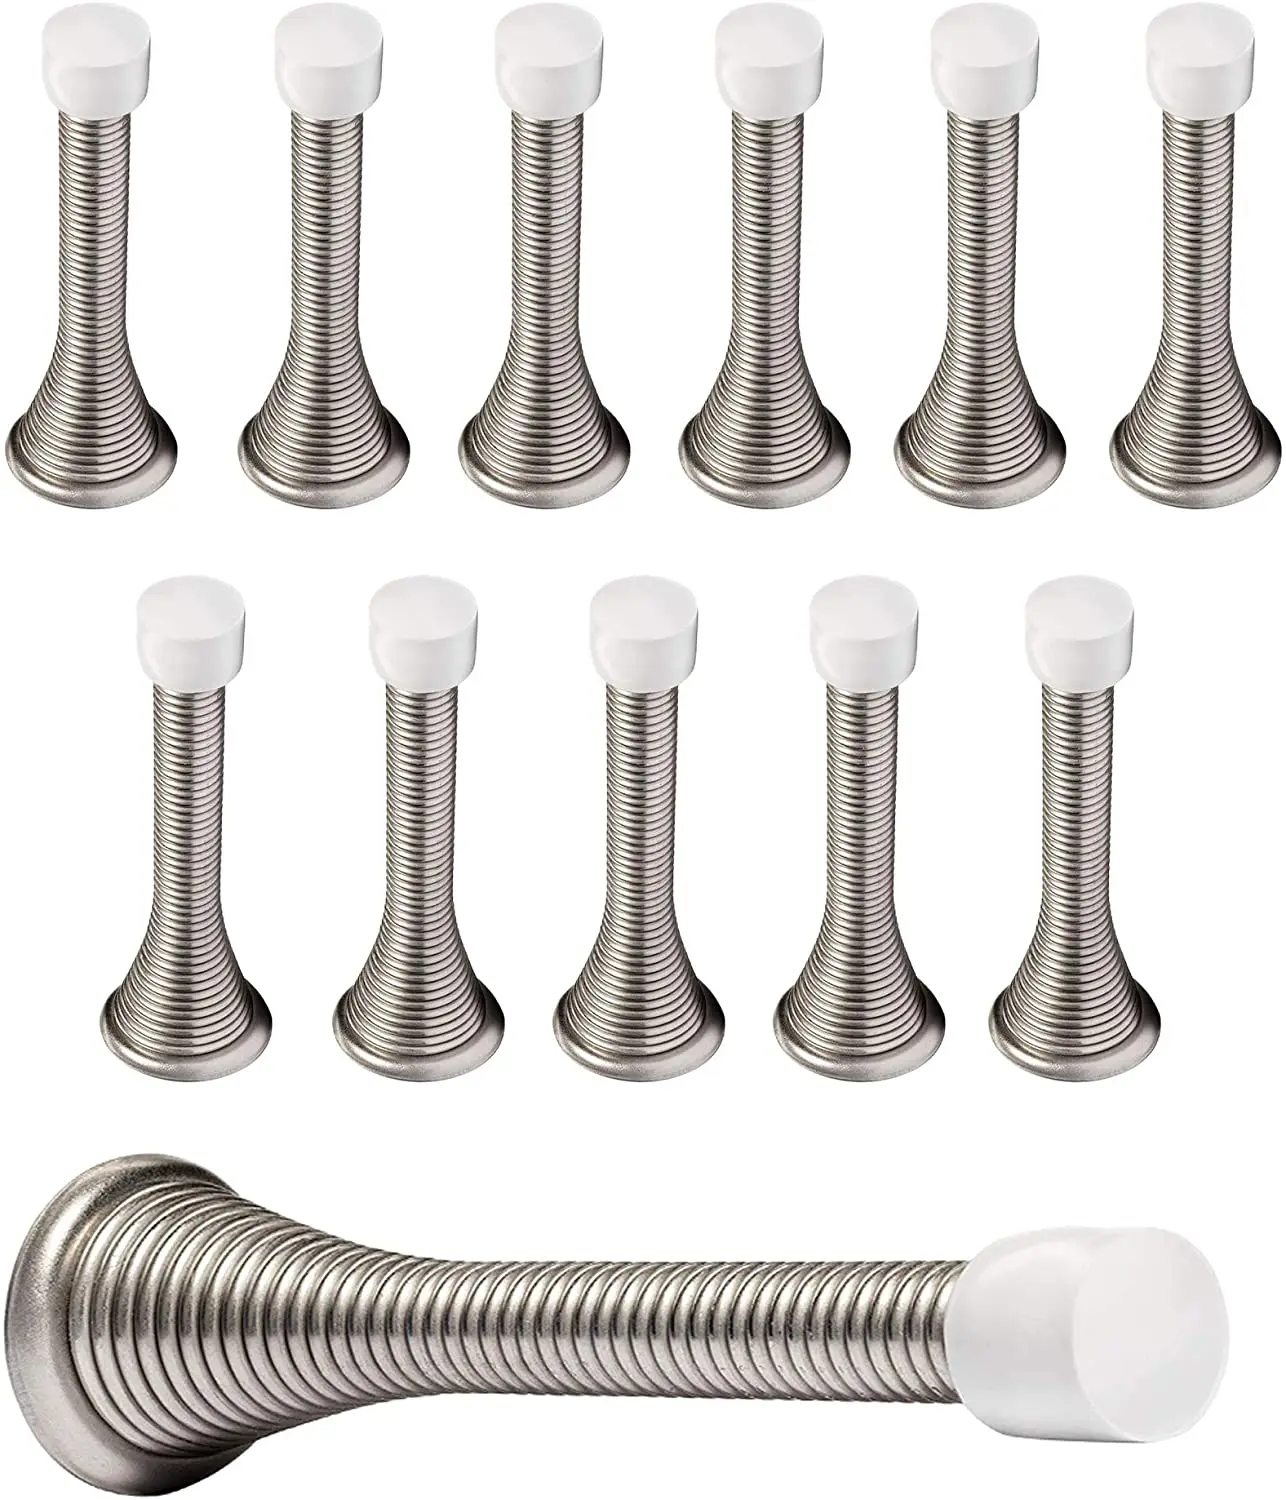 Details about   12 Pack Spring Door Stoppers Wall Flexible Heavy Duty Screw-in Childproof Nickel 